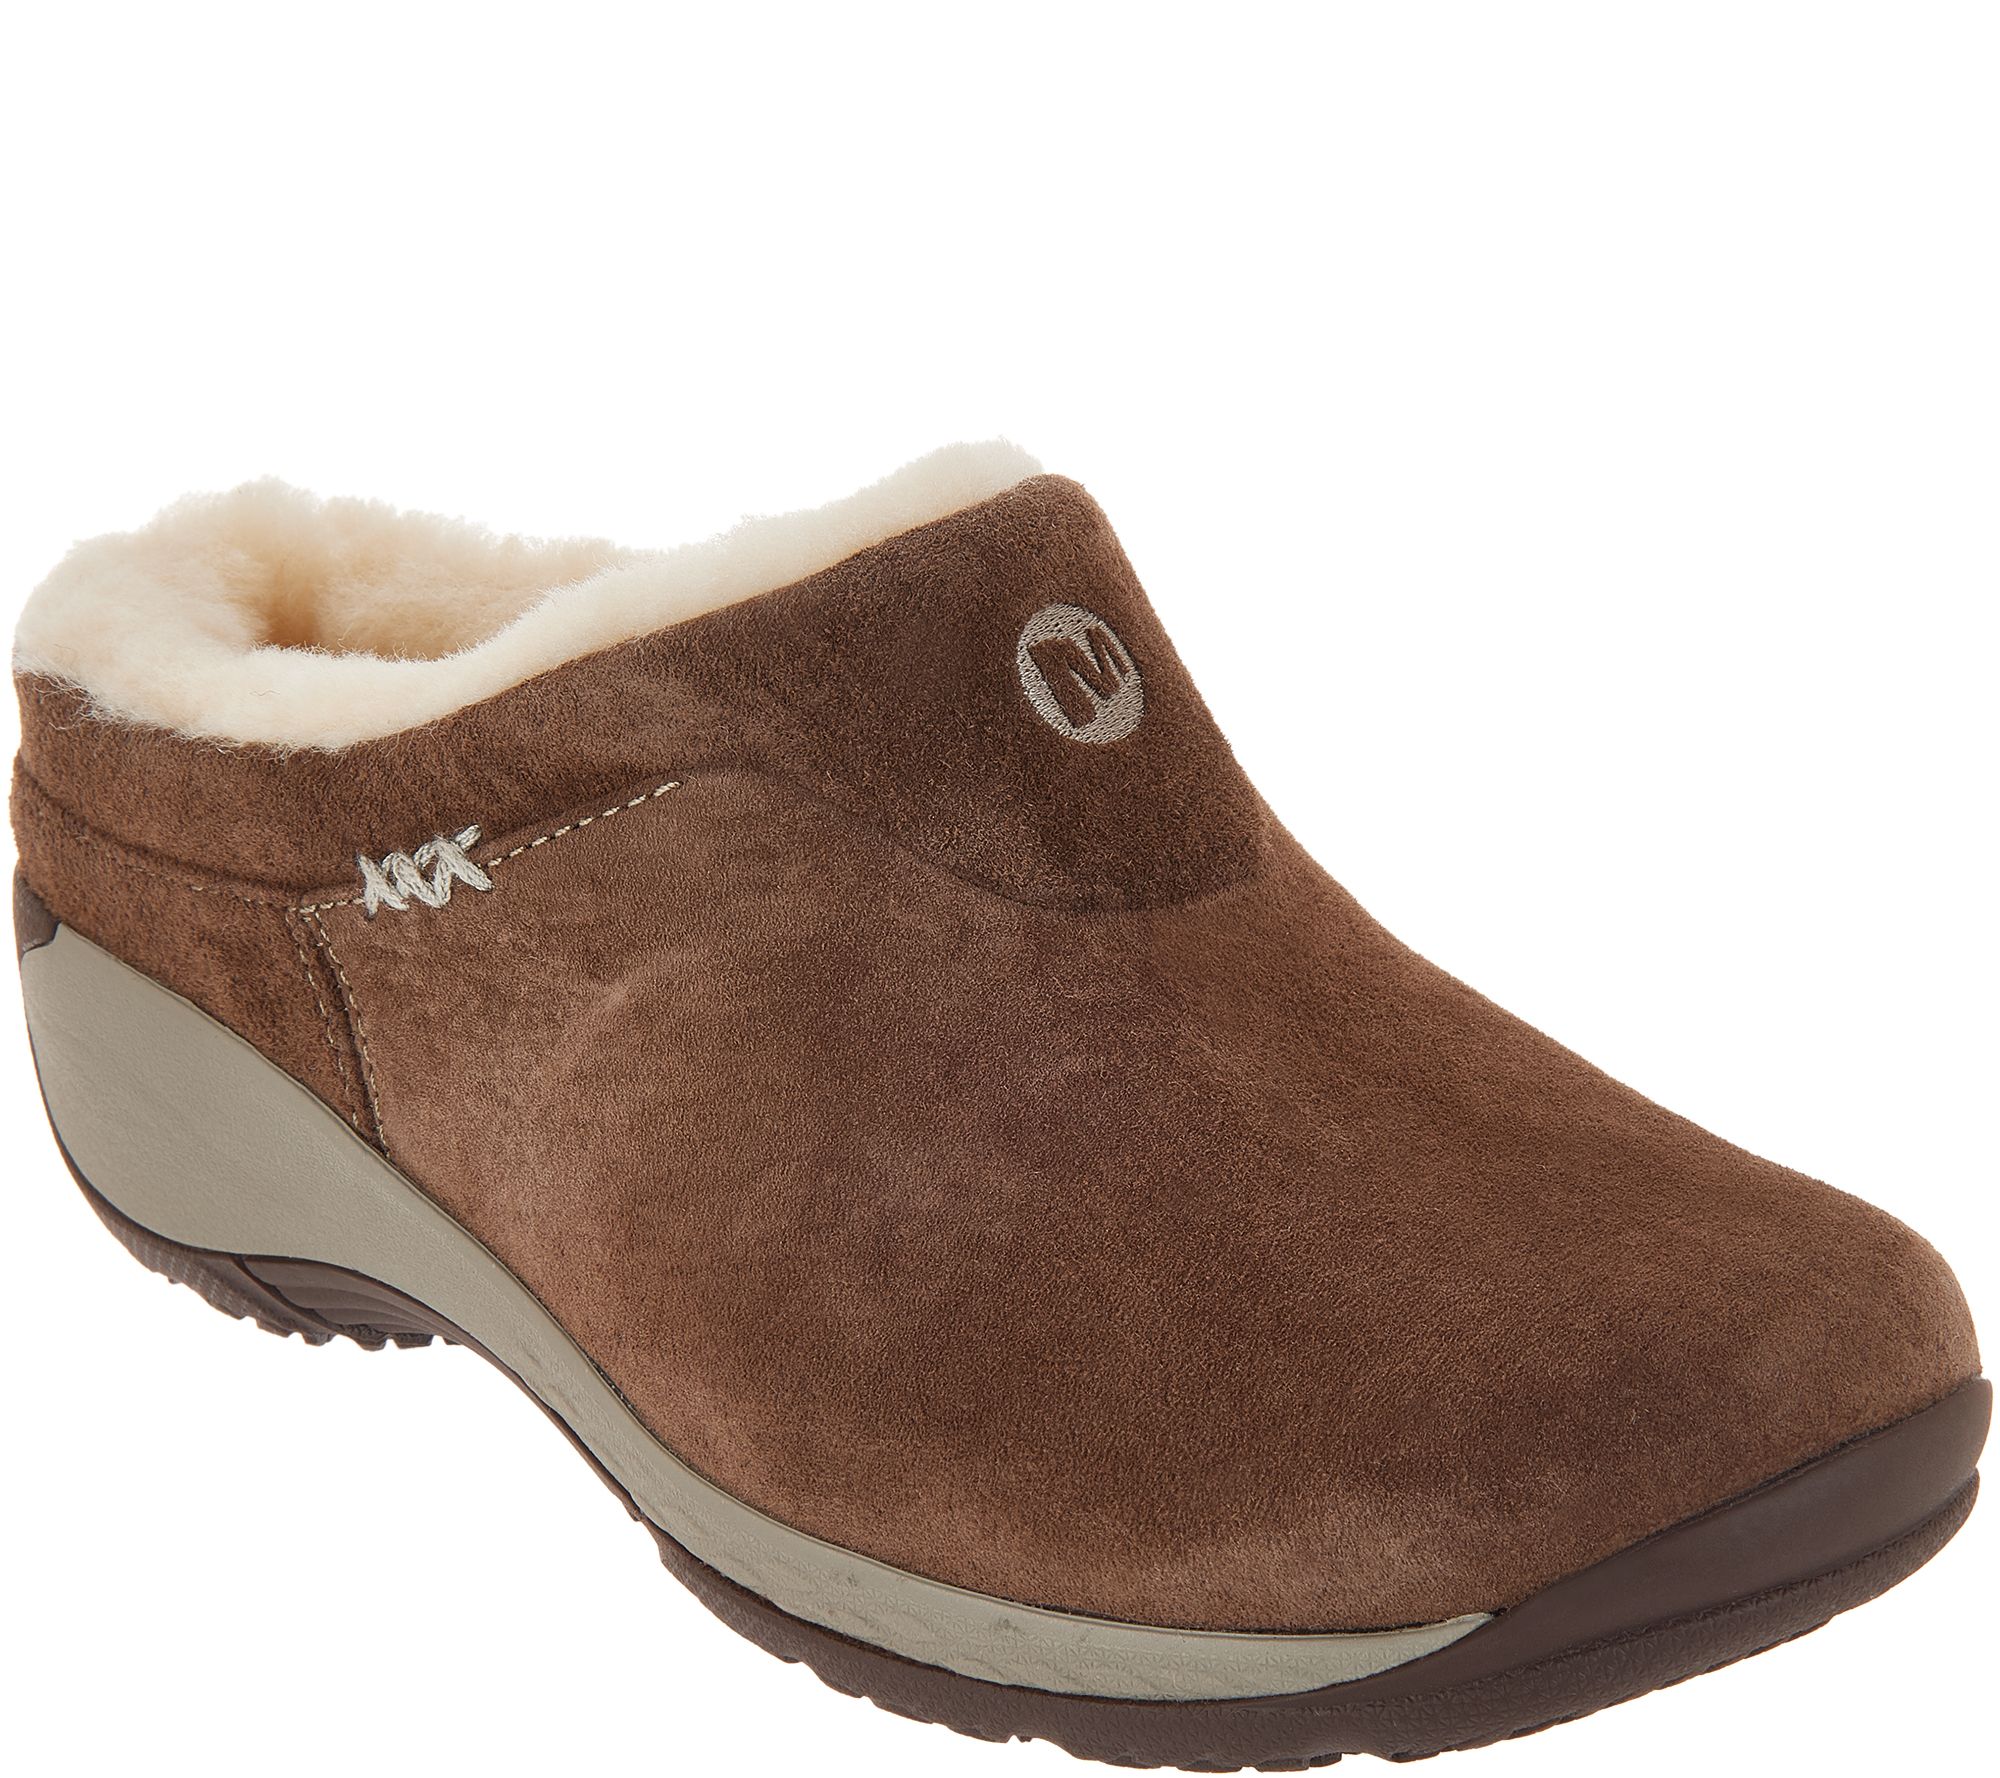 merrell lined clogs